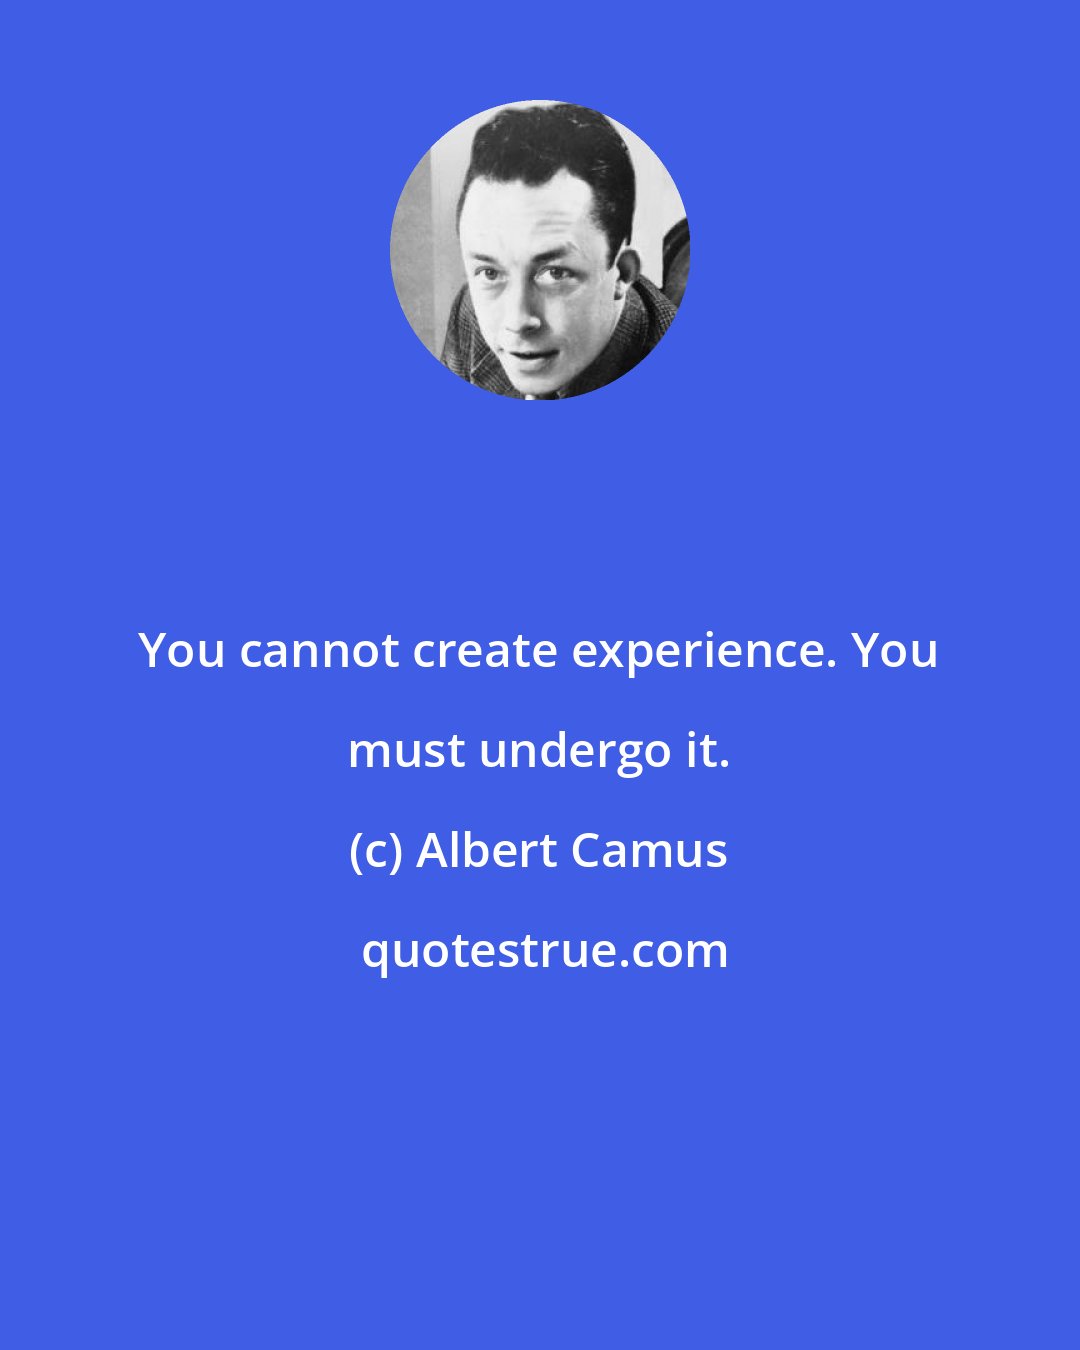 Albert Camus: You cannot create experience. You must undergo it.